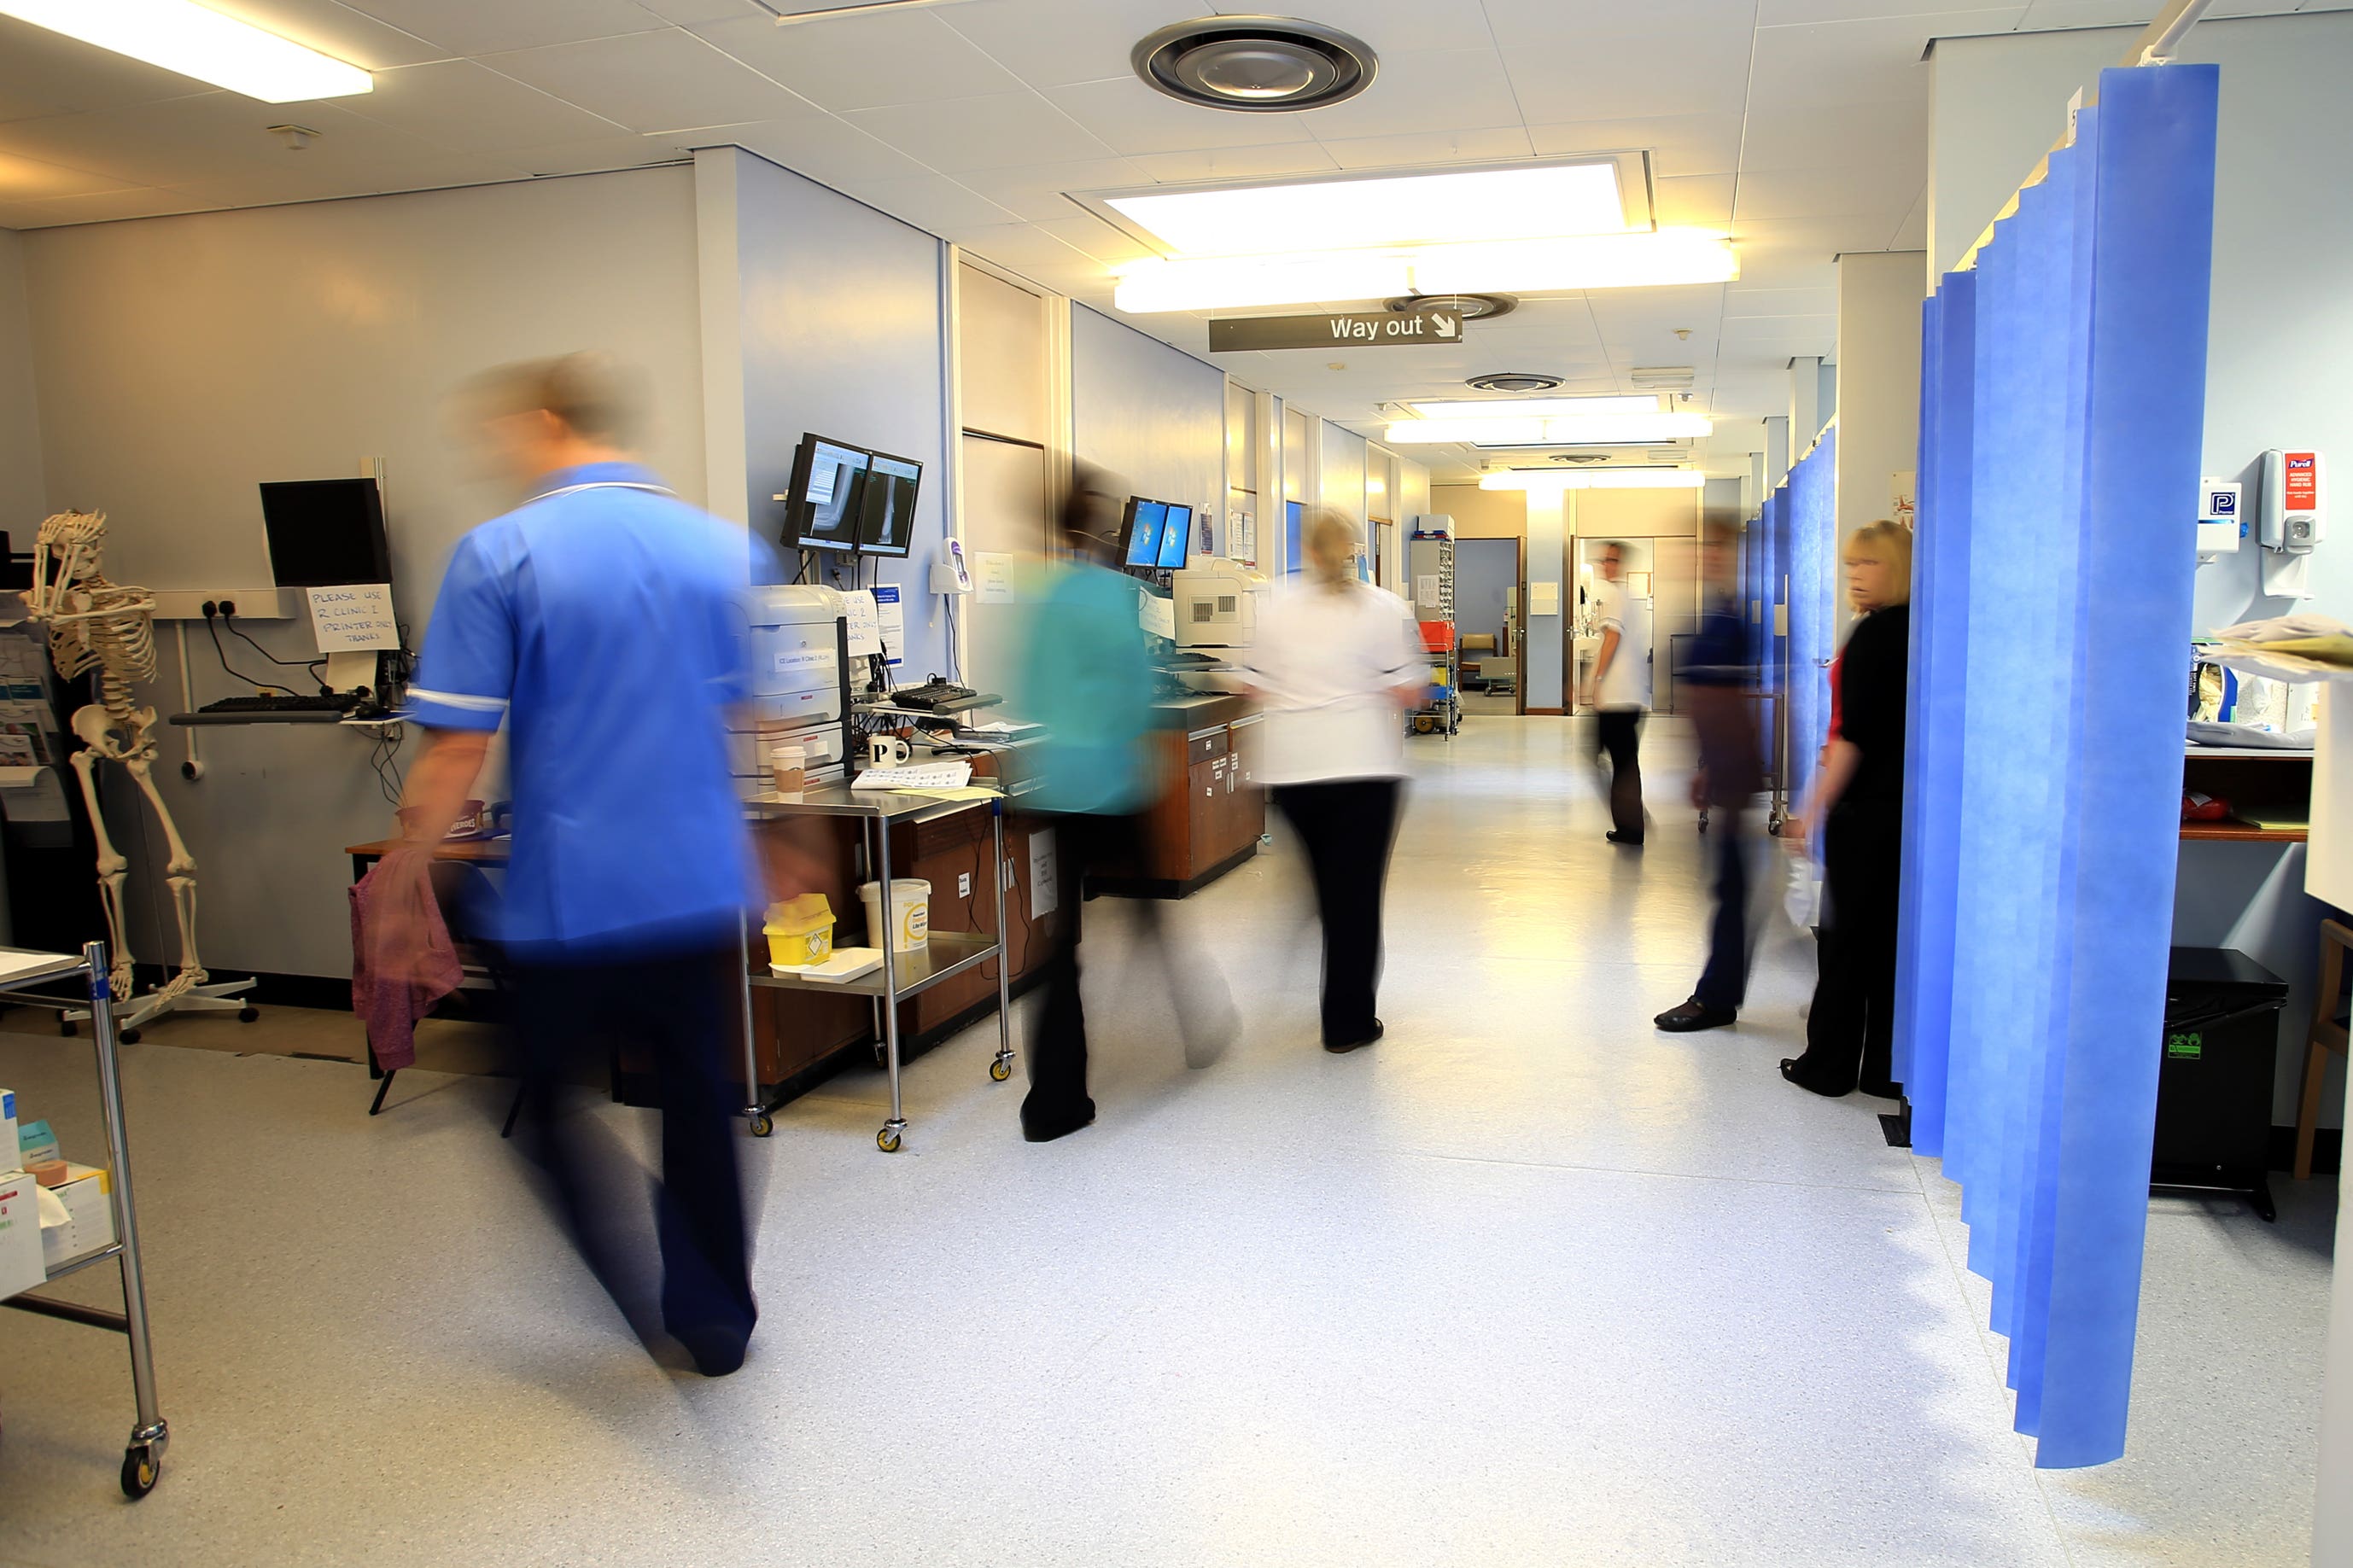 NHS hospitals unable to carry out any planned care during two day consultant strike